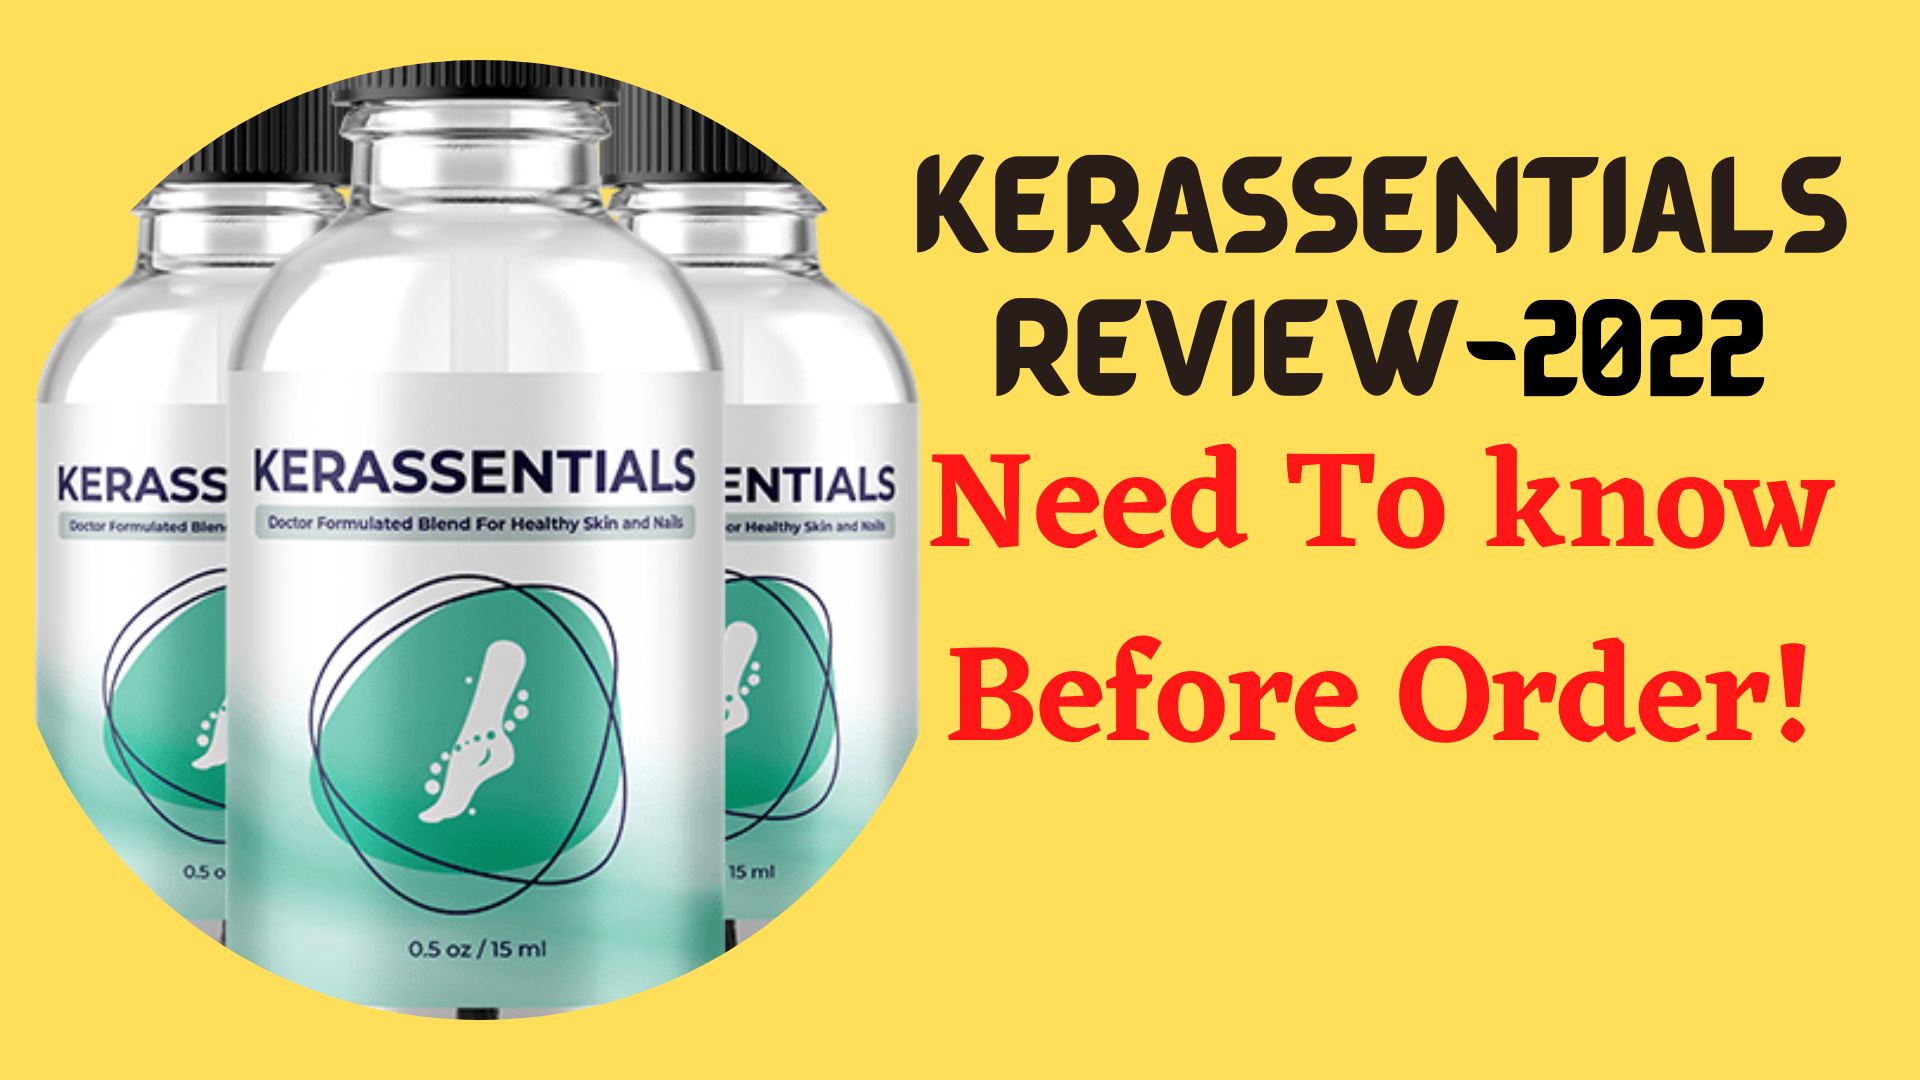 Kerassentials Reviews: (Warning!) Need To know Before Order!